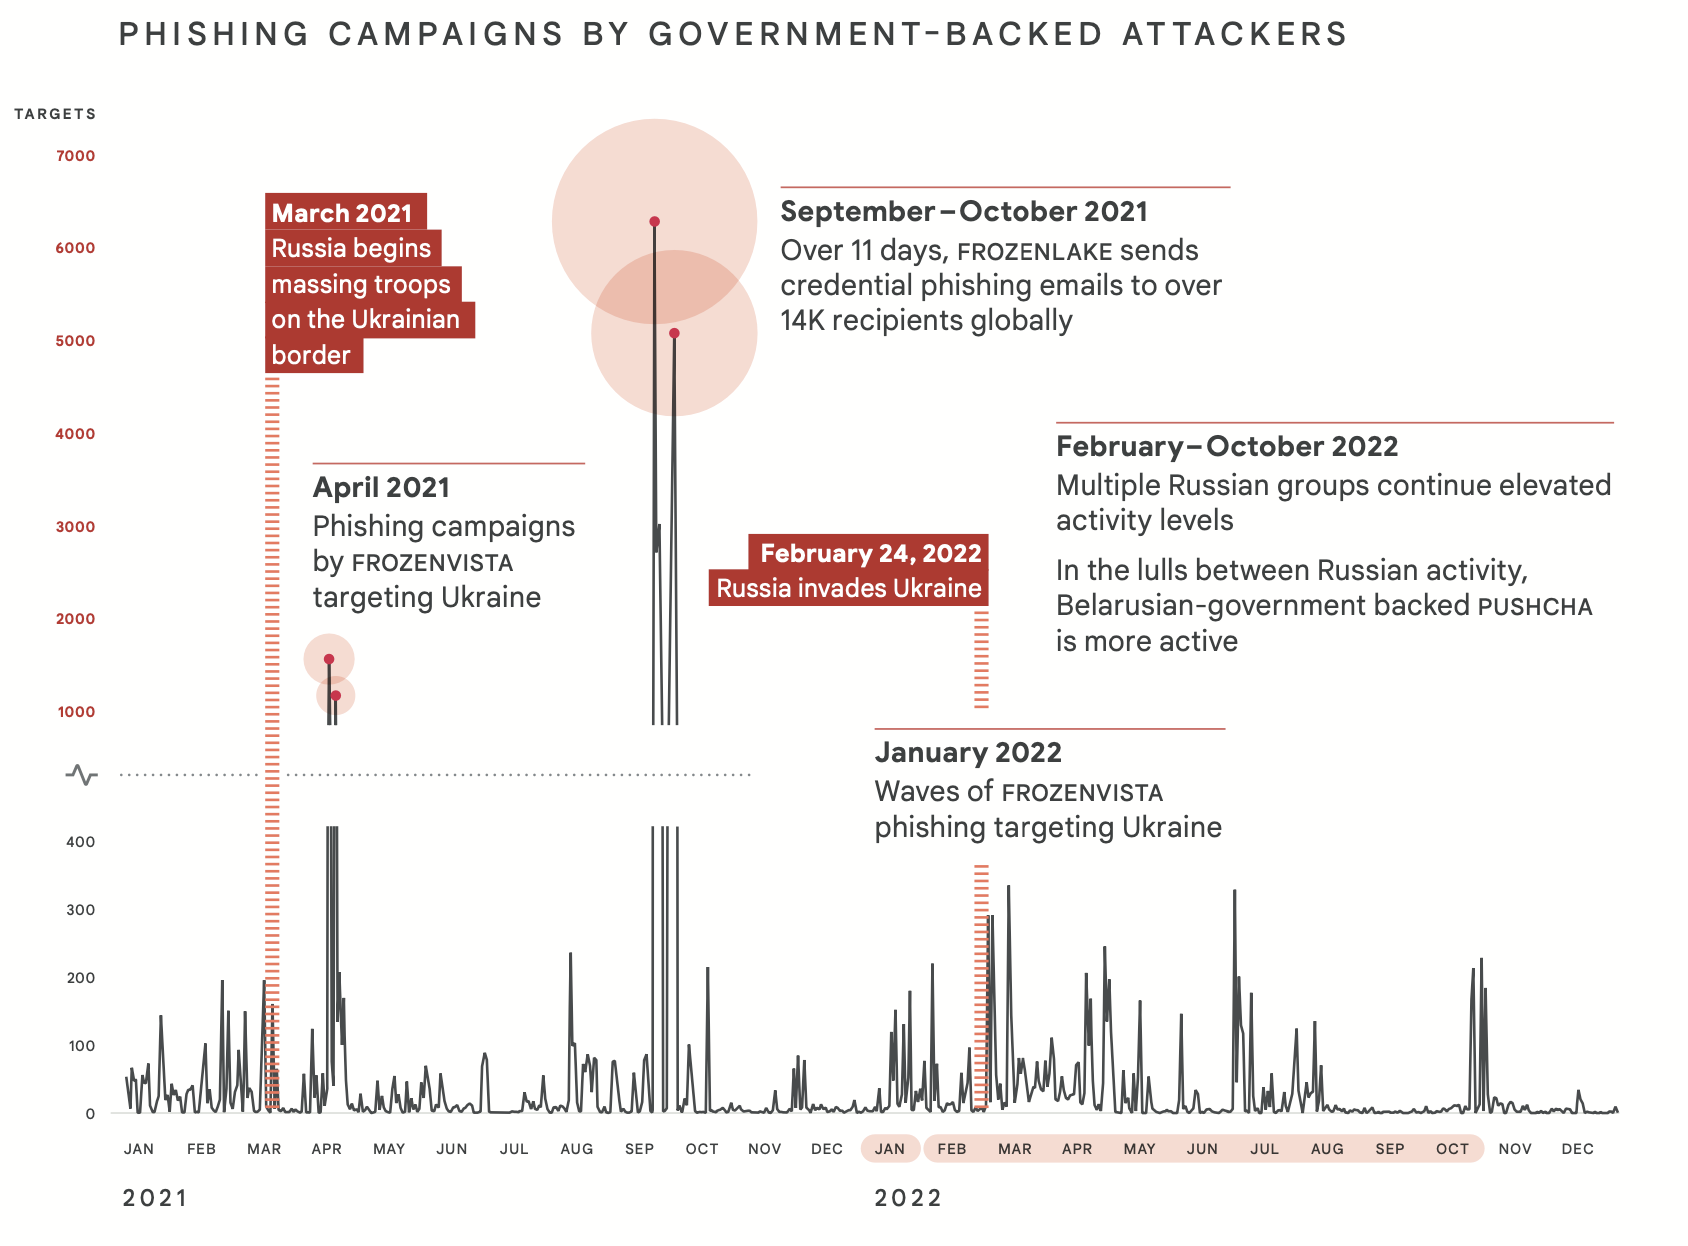 Hacks, leaks and wipers: Google analyzes a year of Russian cyberattacks on Ukraine